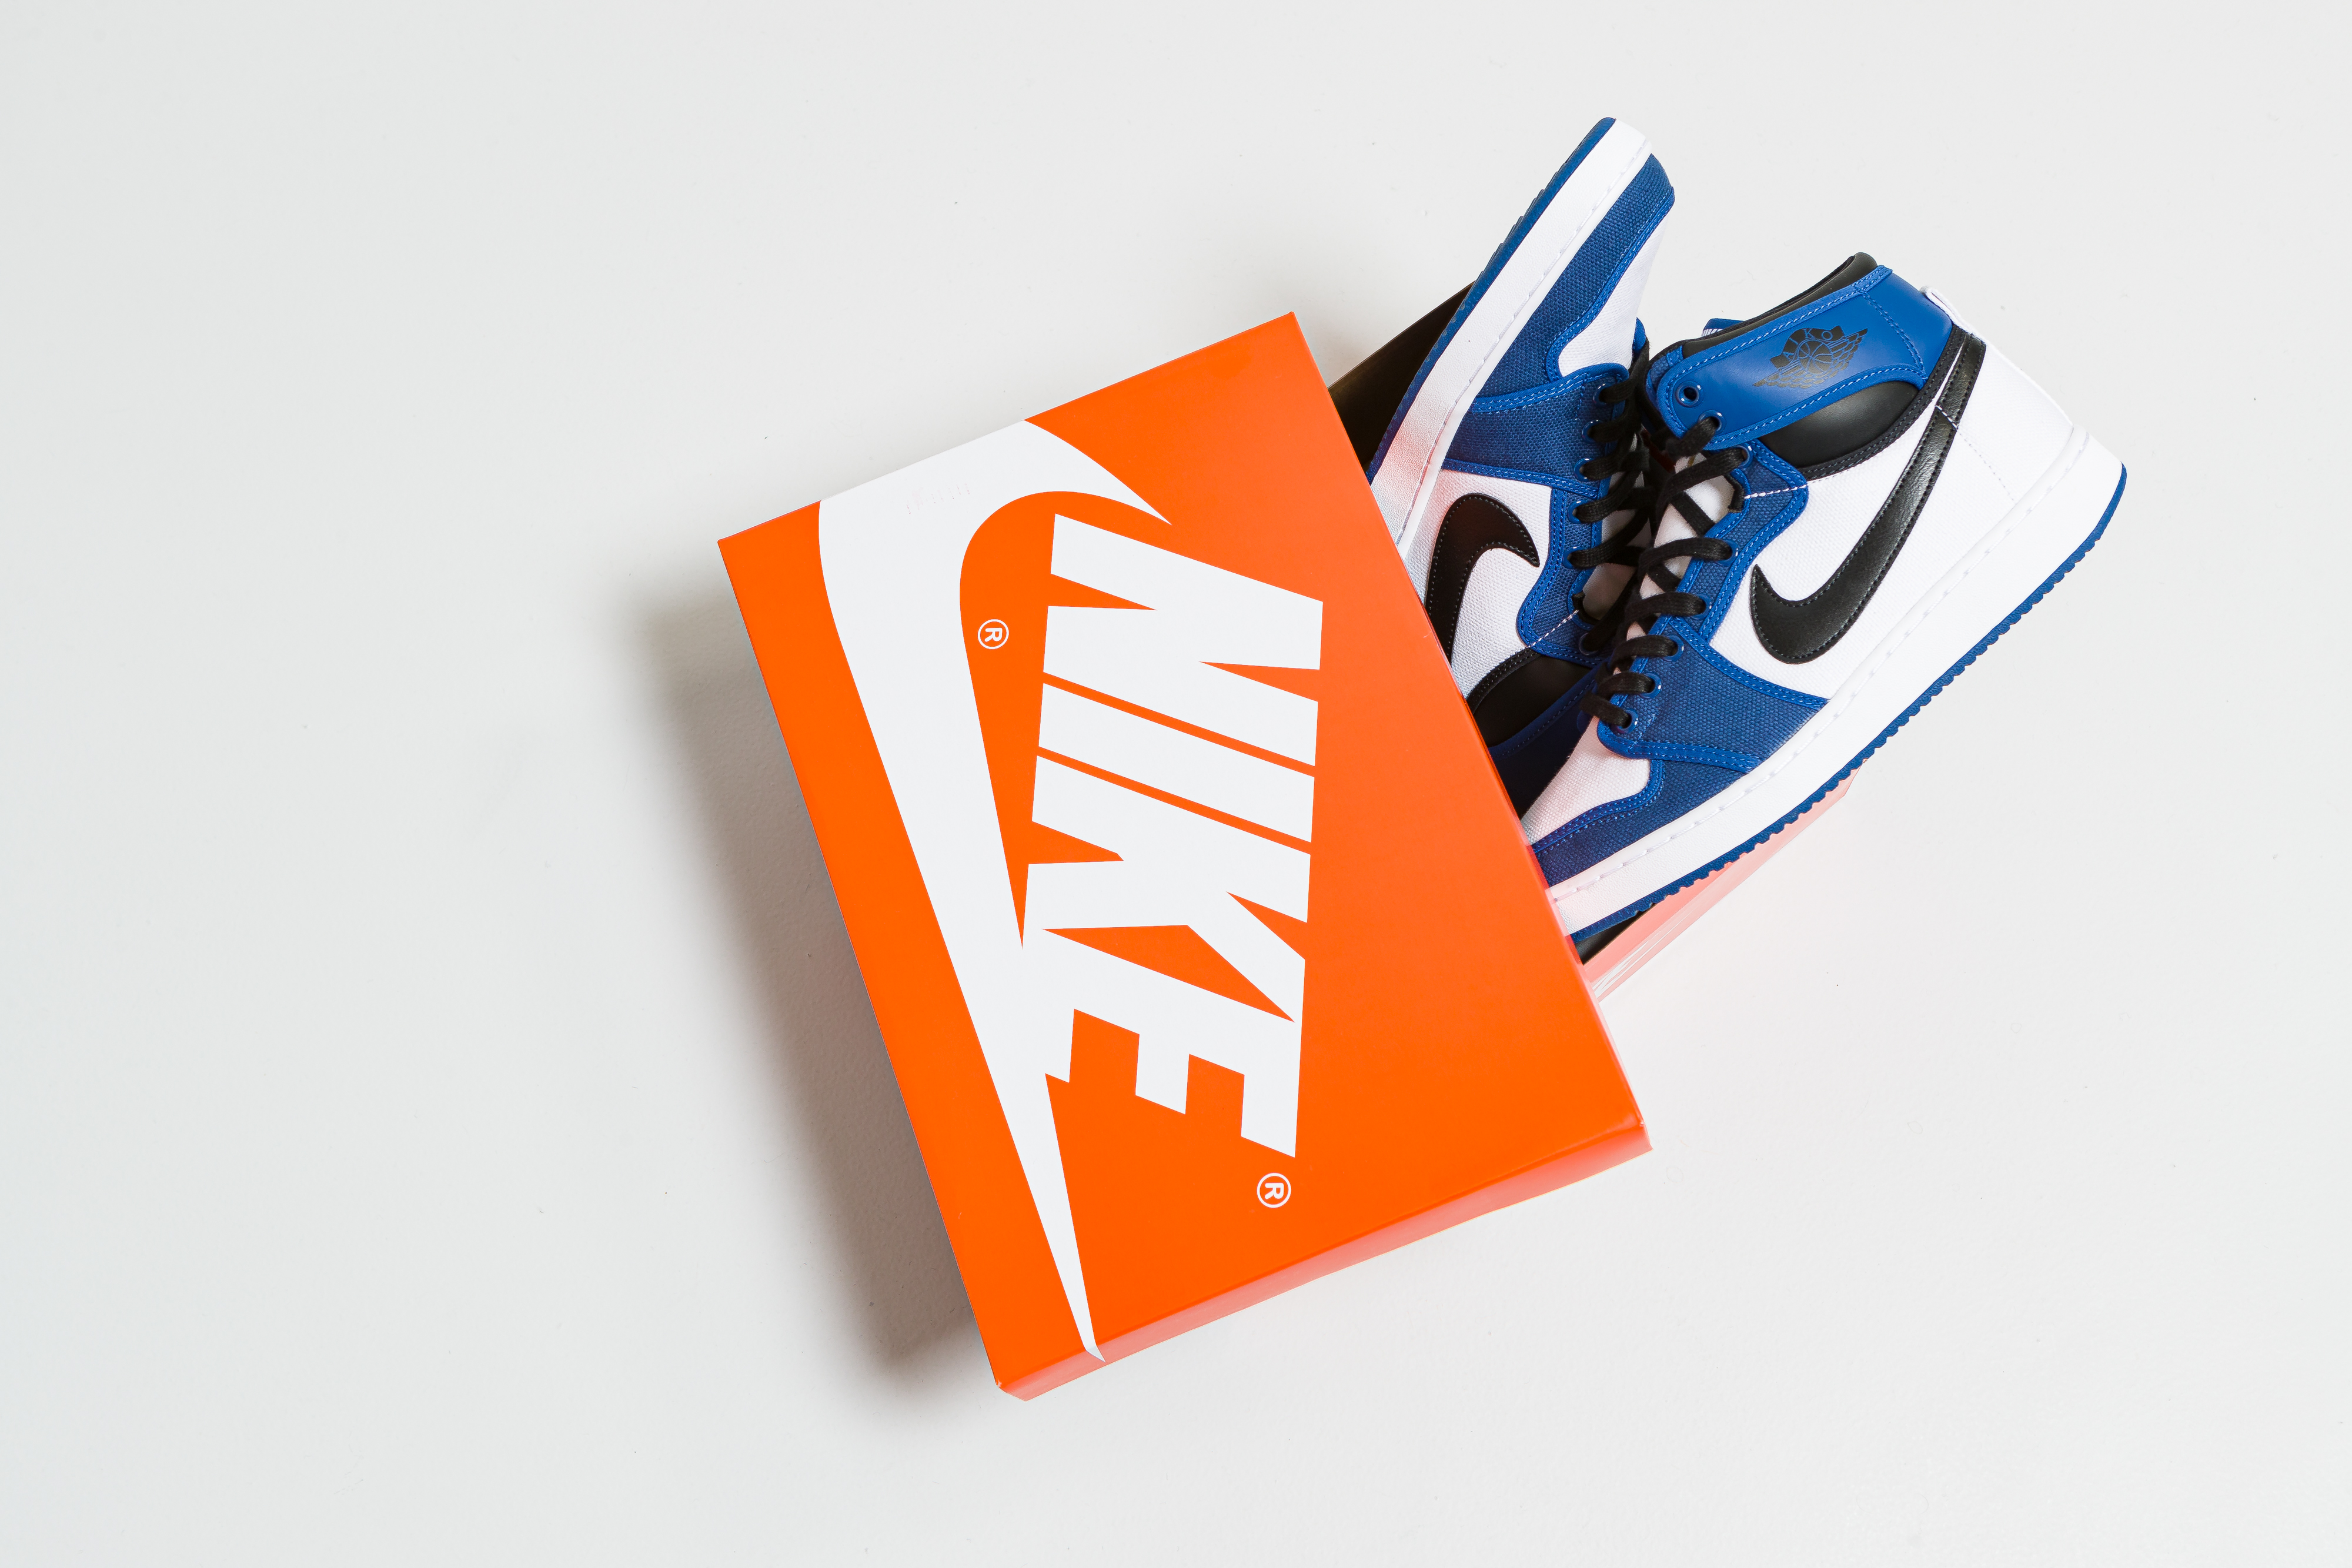 Up There Launches - Nike Air Jordan 1 KO - Storm Blue Black White